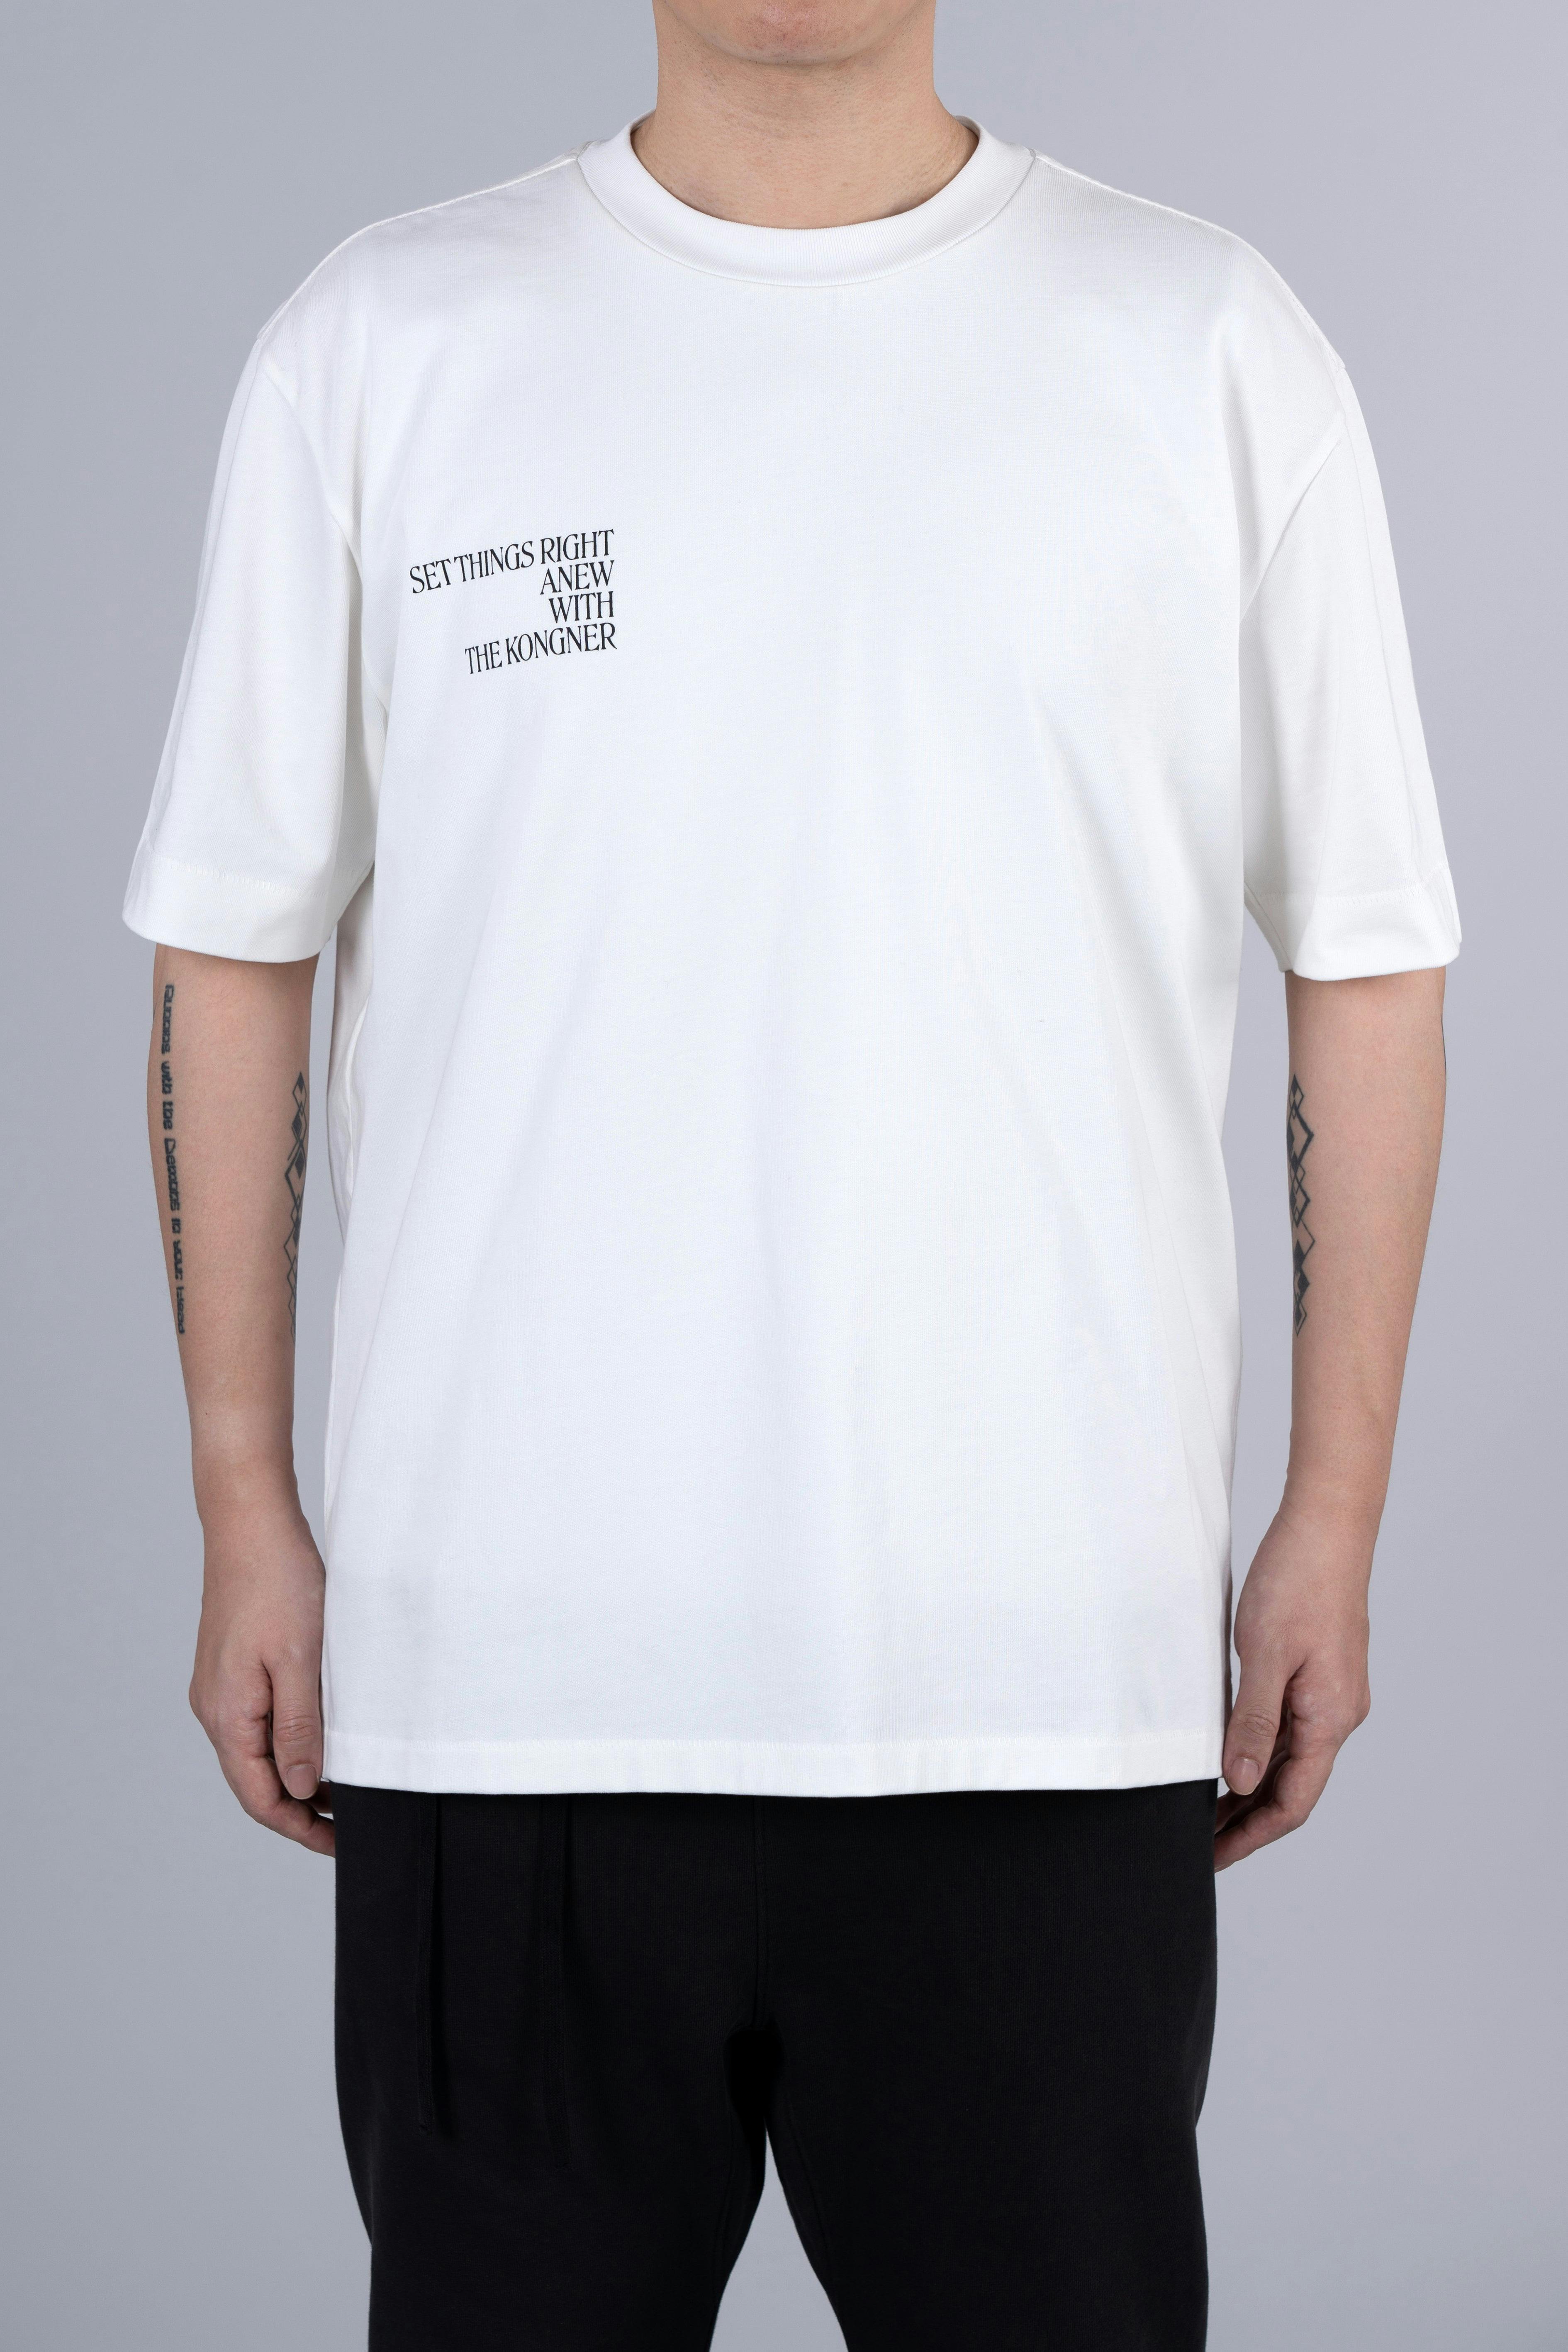 ˝SET THINGS RIGHT˝ Regular T-Shirt - Decayed White